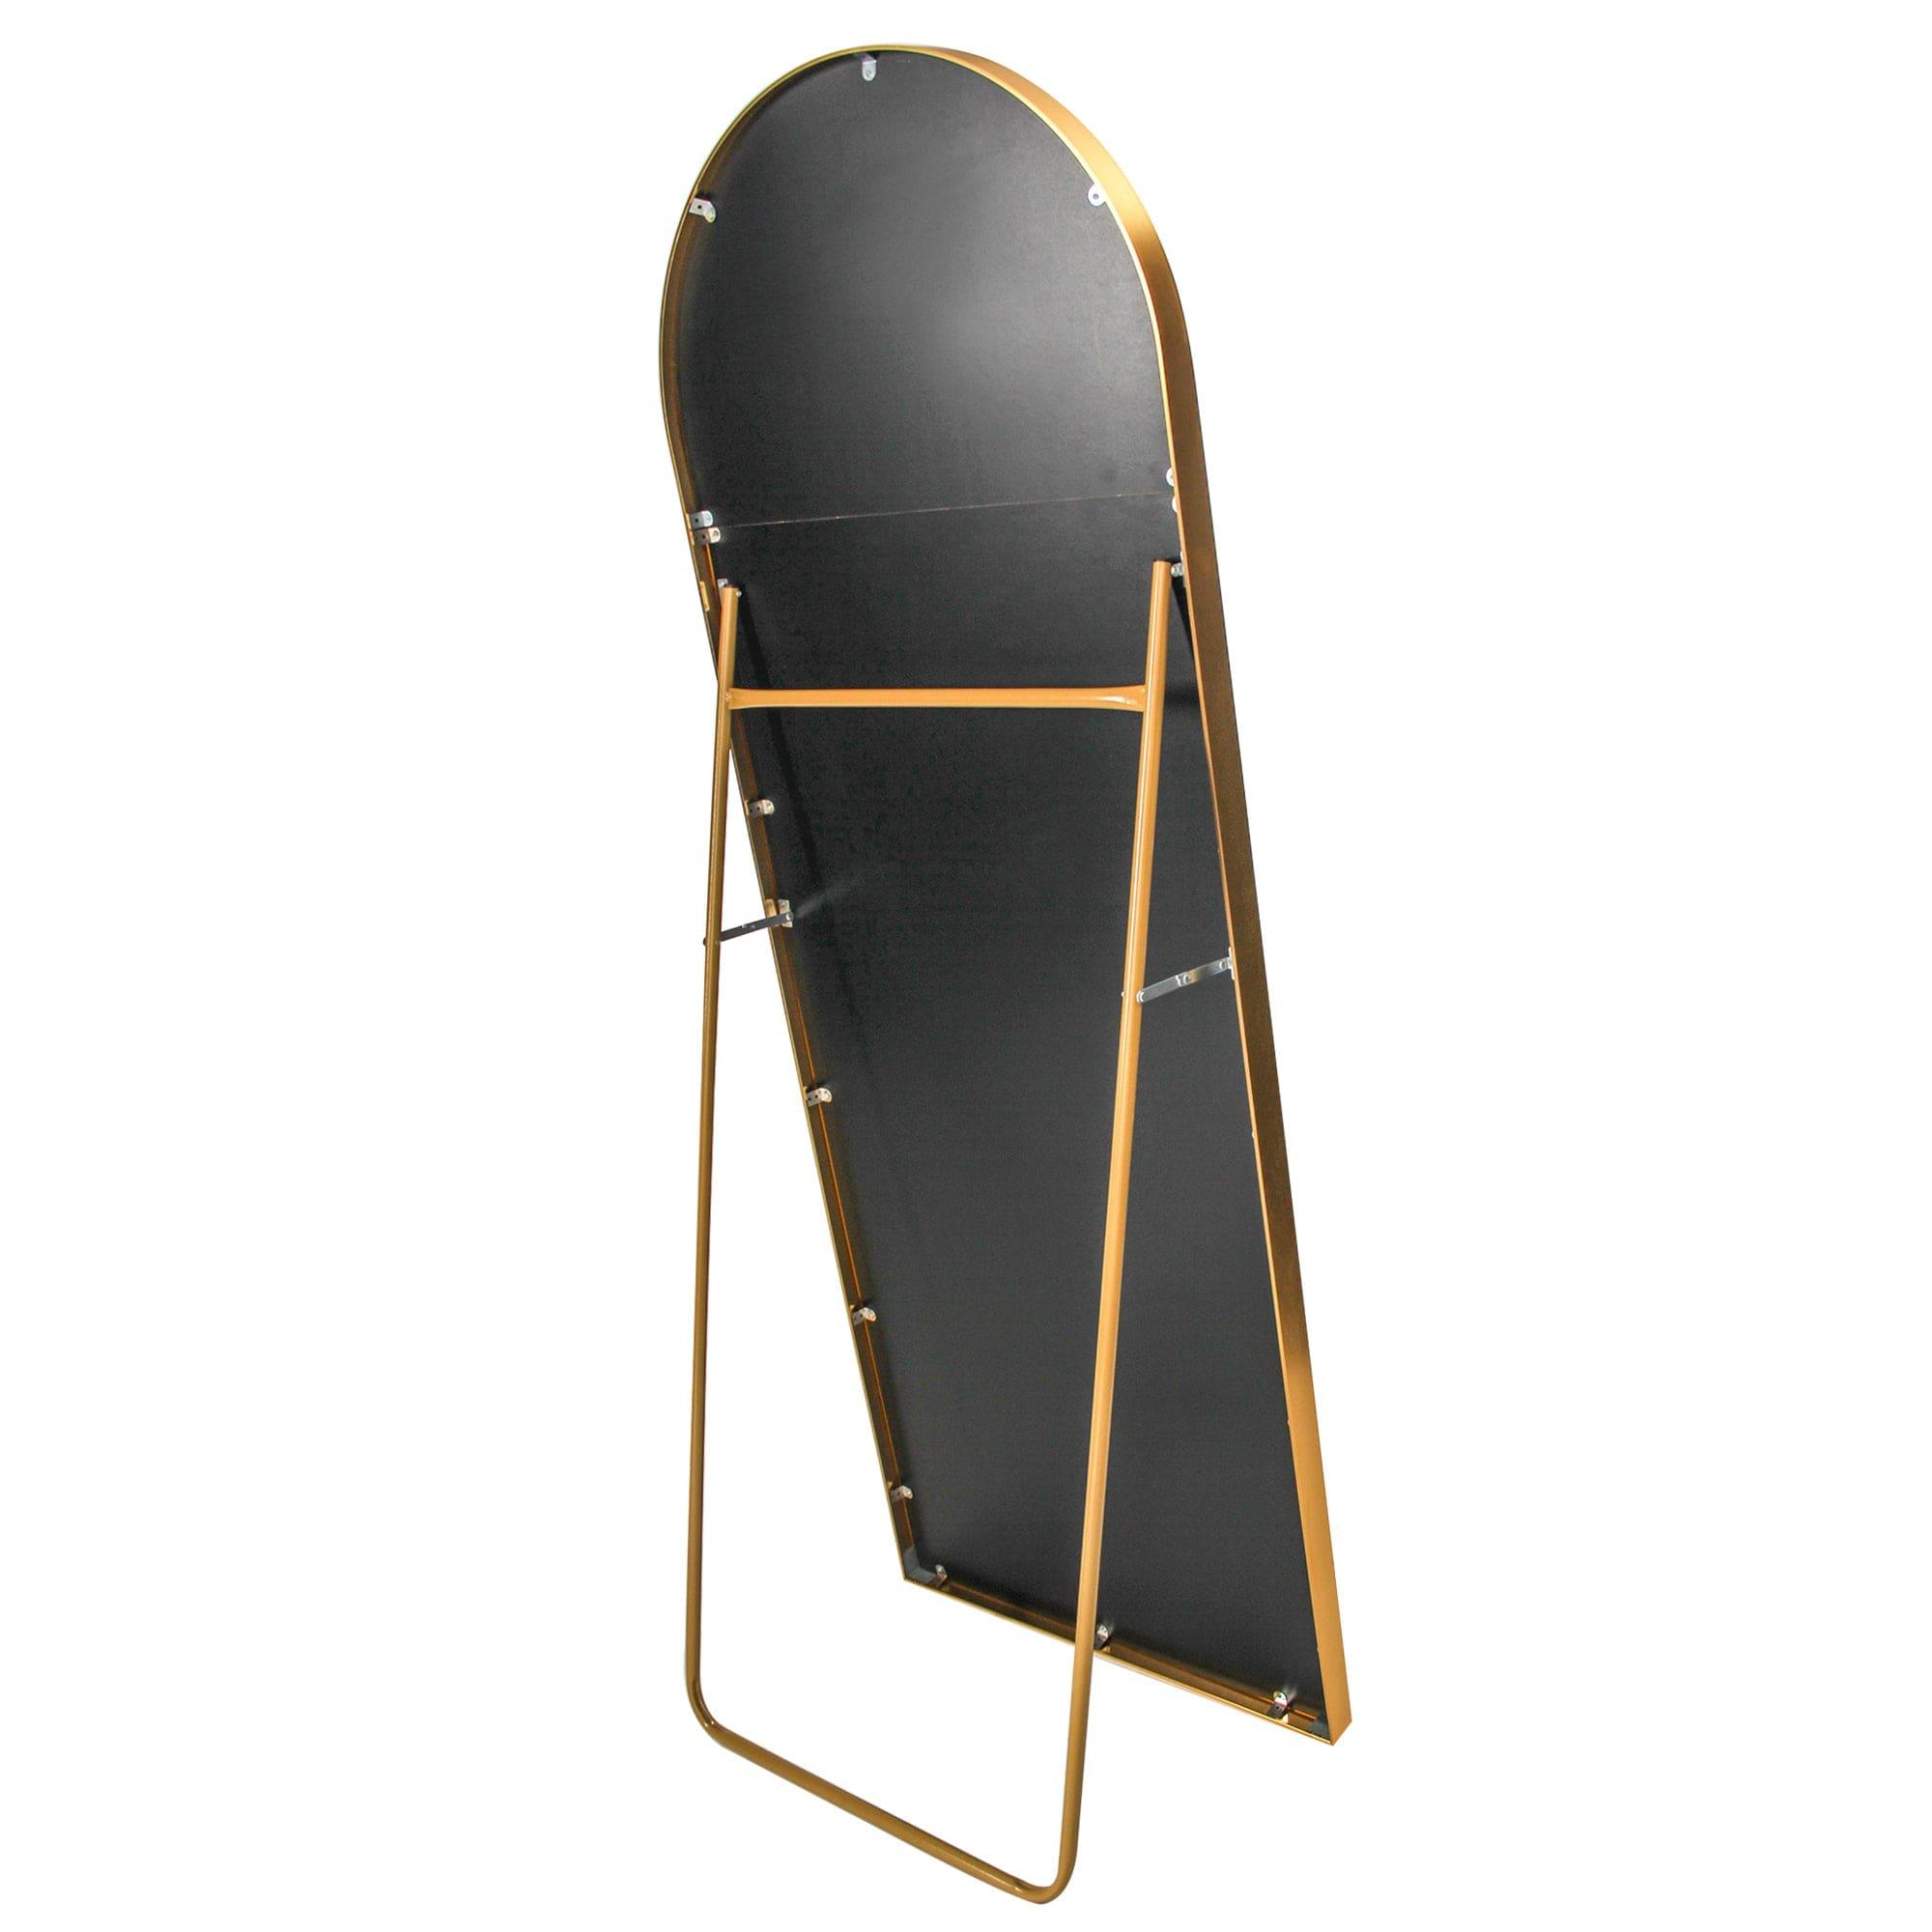 Shop Arched Full Length Mirror Floor Mirror Hanging Standing or Leaning, Bedroom Mirror Wall-Mounted Mirror Dressing Mirror with Gold  Aluminum Alloy Frame, 65" x 23.6" Mademoiselle Home Decor